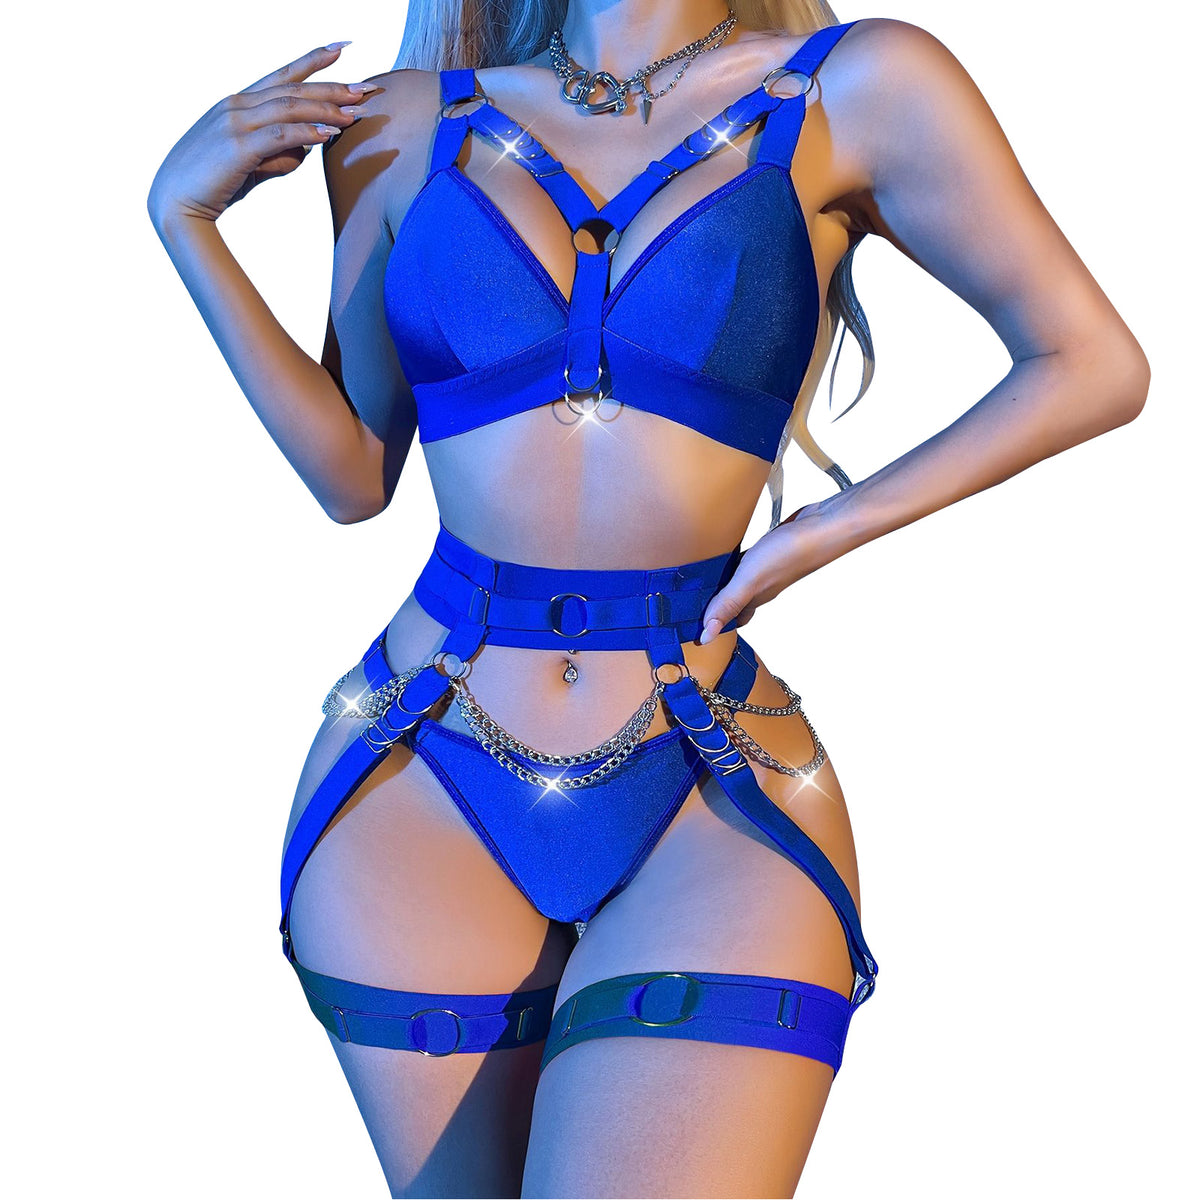 Yomorio Strappy Bralette Set | Sultry O-Ring Accents & Garter Belt